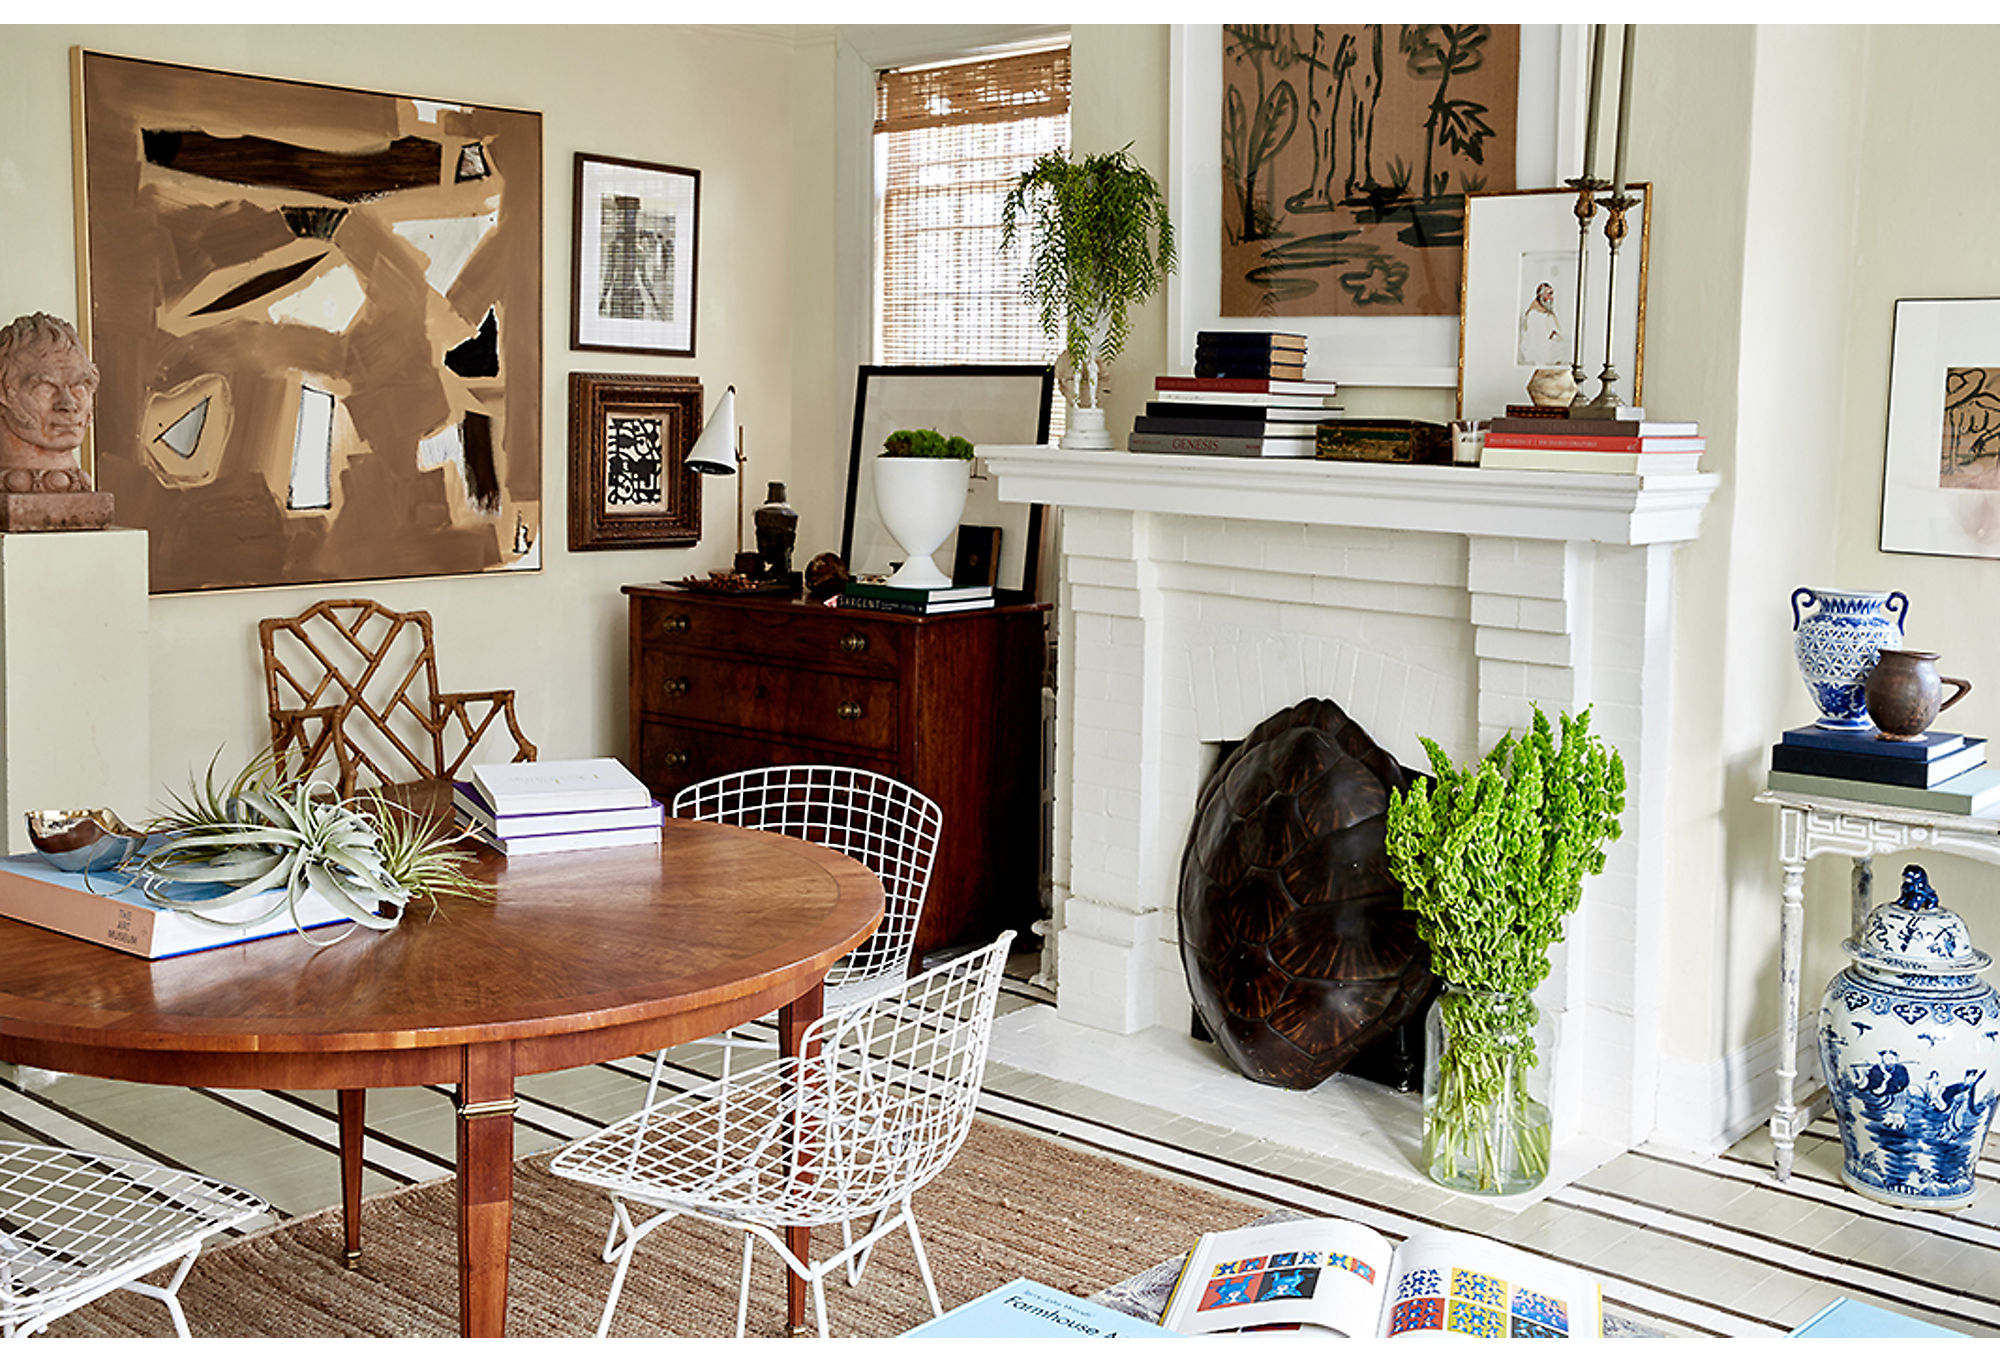 Small-space living often means living in an open floor plan where the living room, dining room, and kitchen all connect. If you stick to a cohesive color palette, as designer/artist William McClure did here in his Alabama home, you can seamlessly blend the combination space into a single design story. Photo by Frank Tribble.
